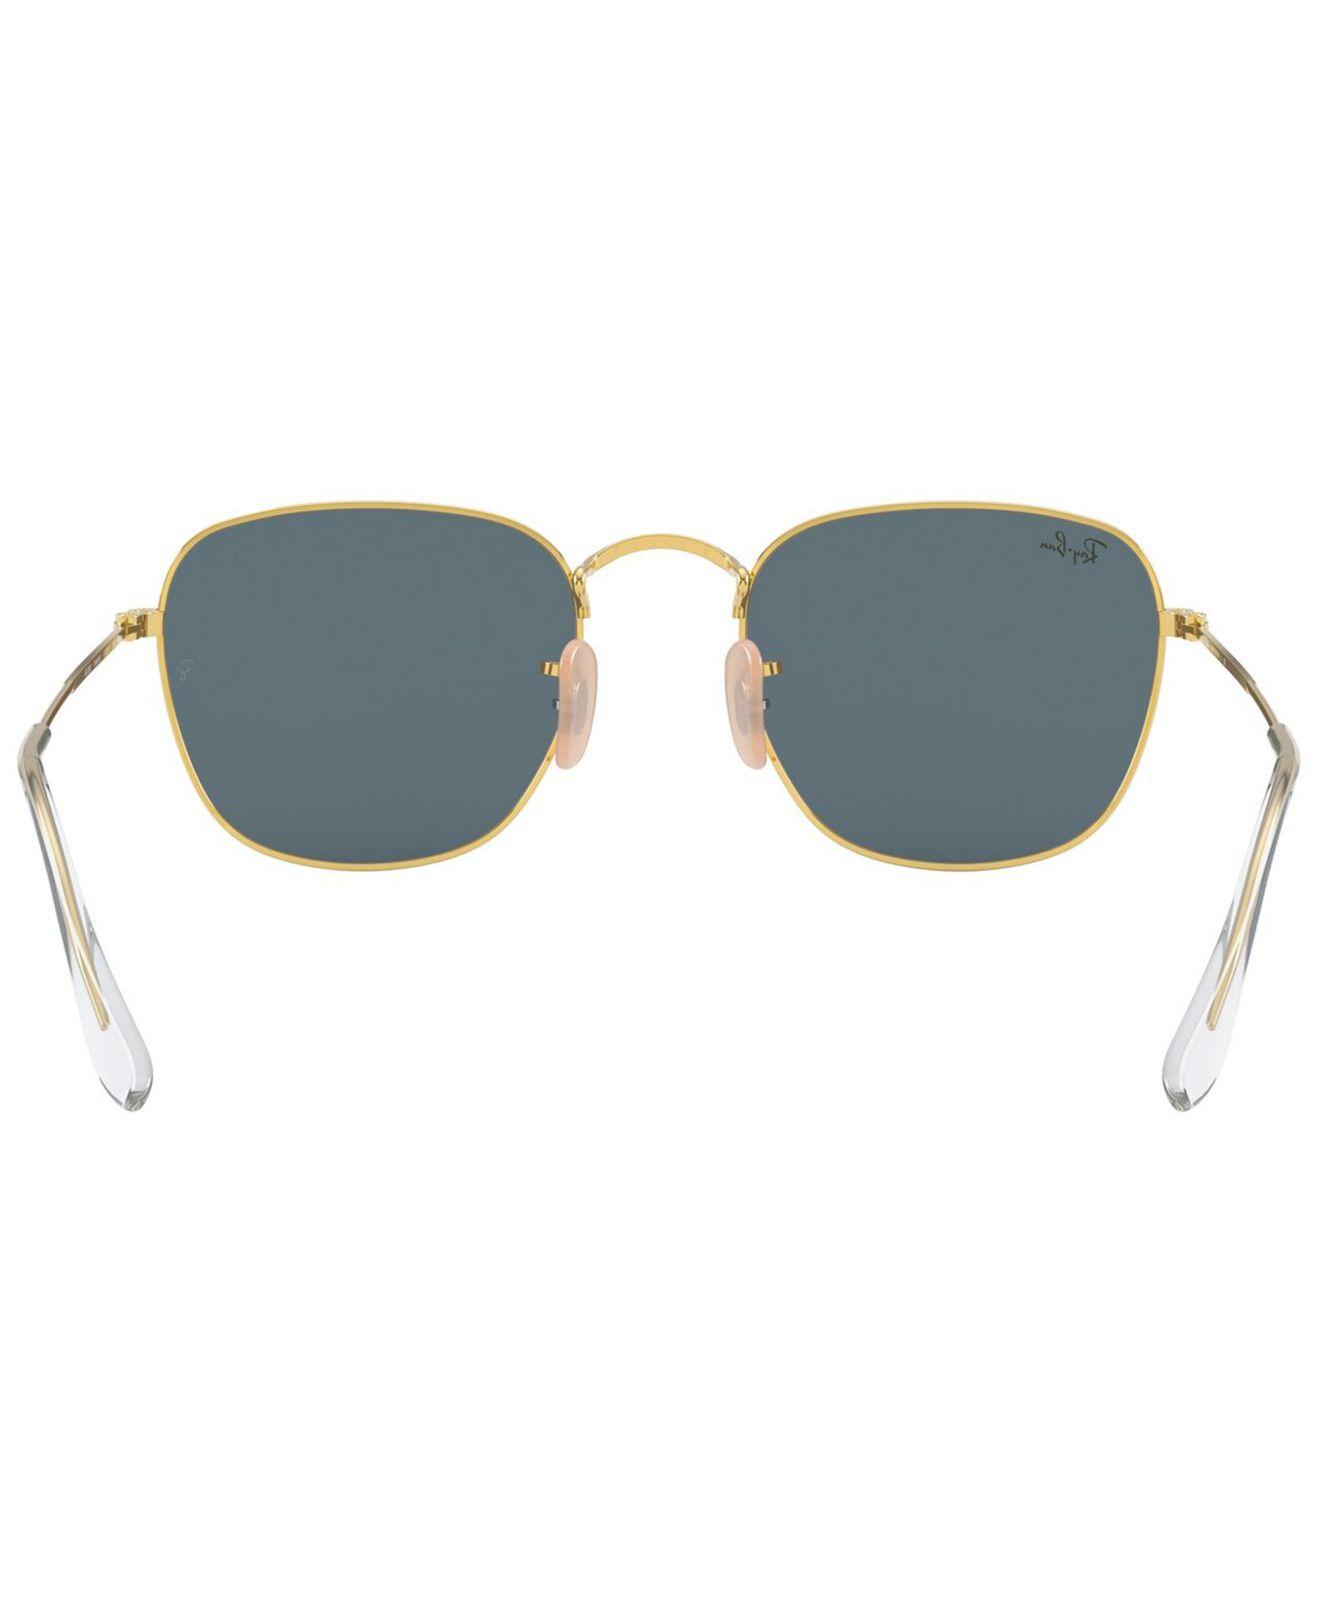 Ray-Ban Frank Sunglasses, Rb3857 51 in Blue - Lyst